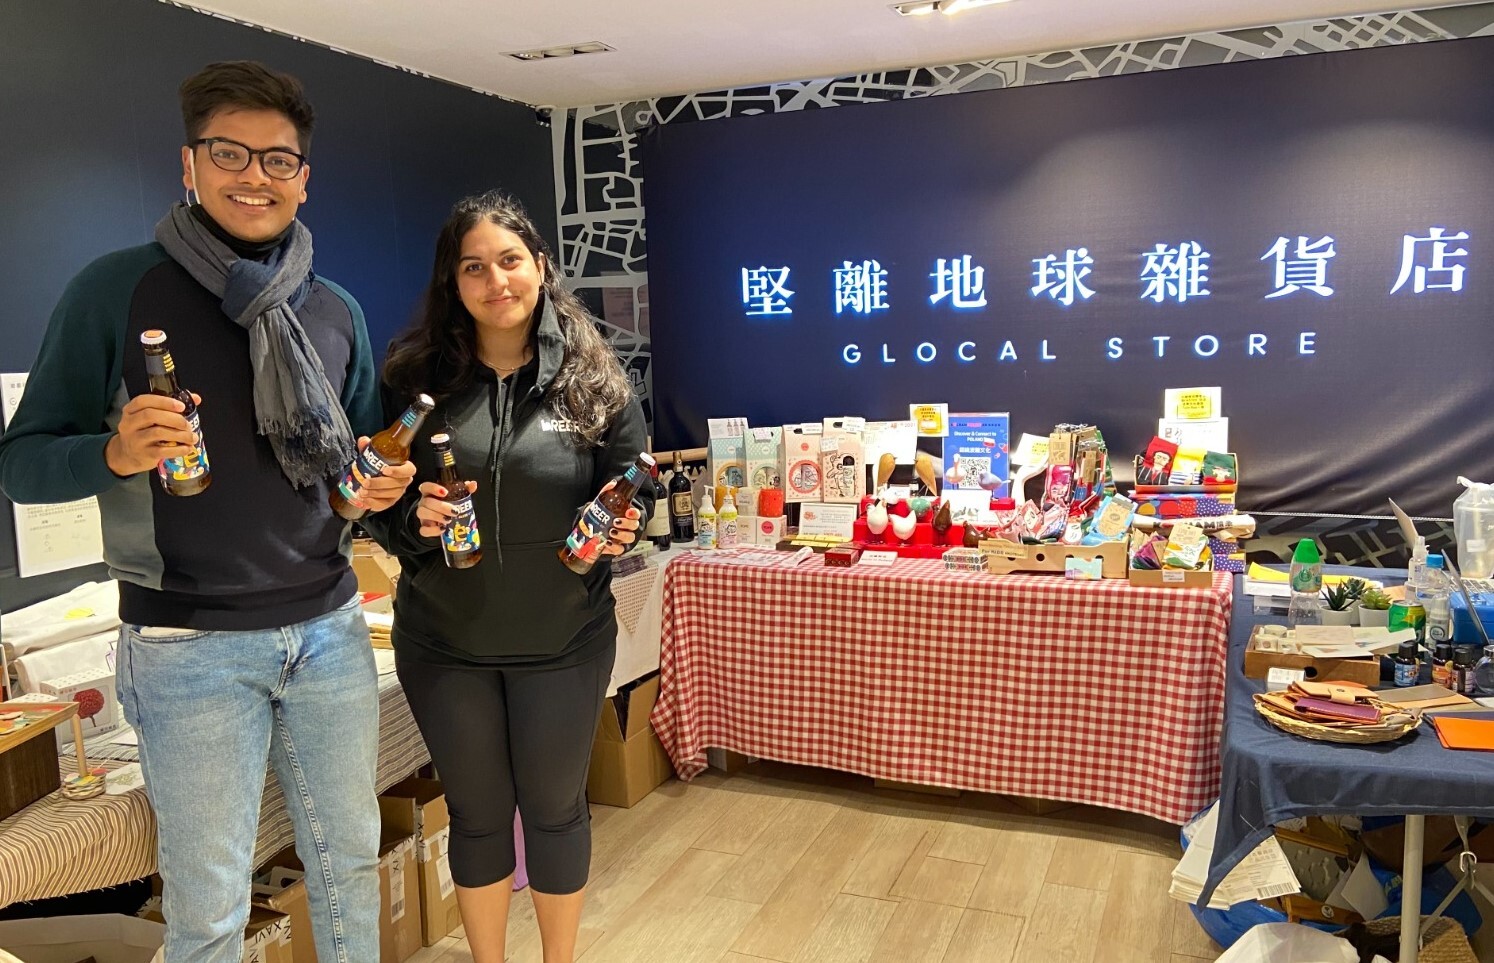 The team selling beers at a pop-up stall